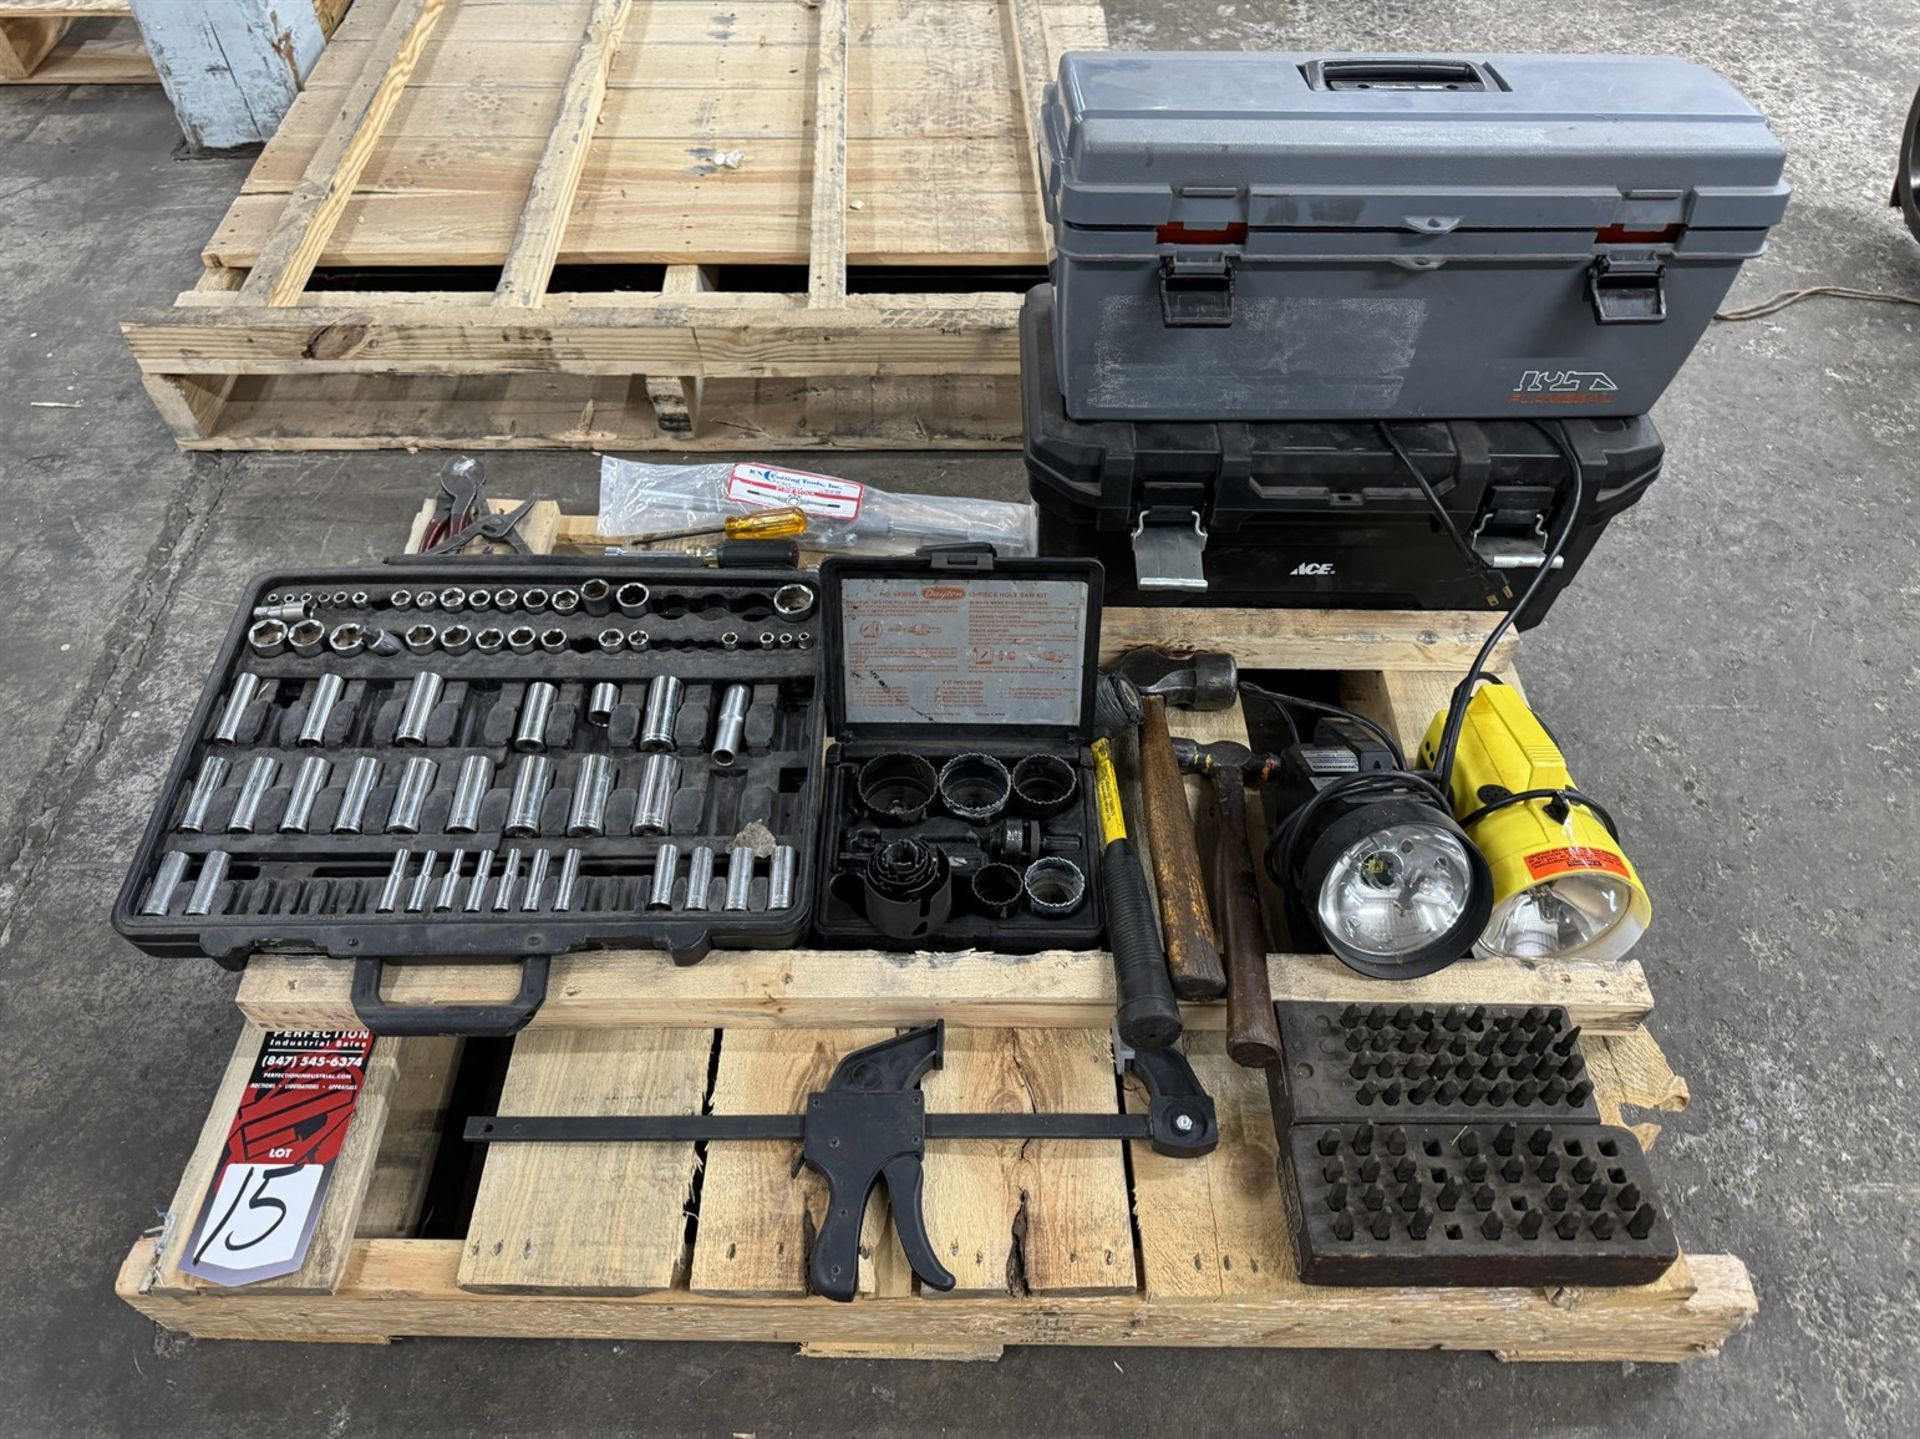 Lot Comprising Assorted Sockets, Hammers, Tool Boxes, Hole Saws, Stamps and Work Lights